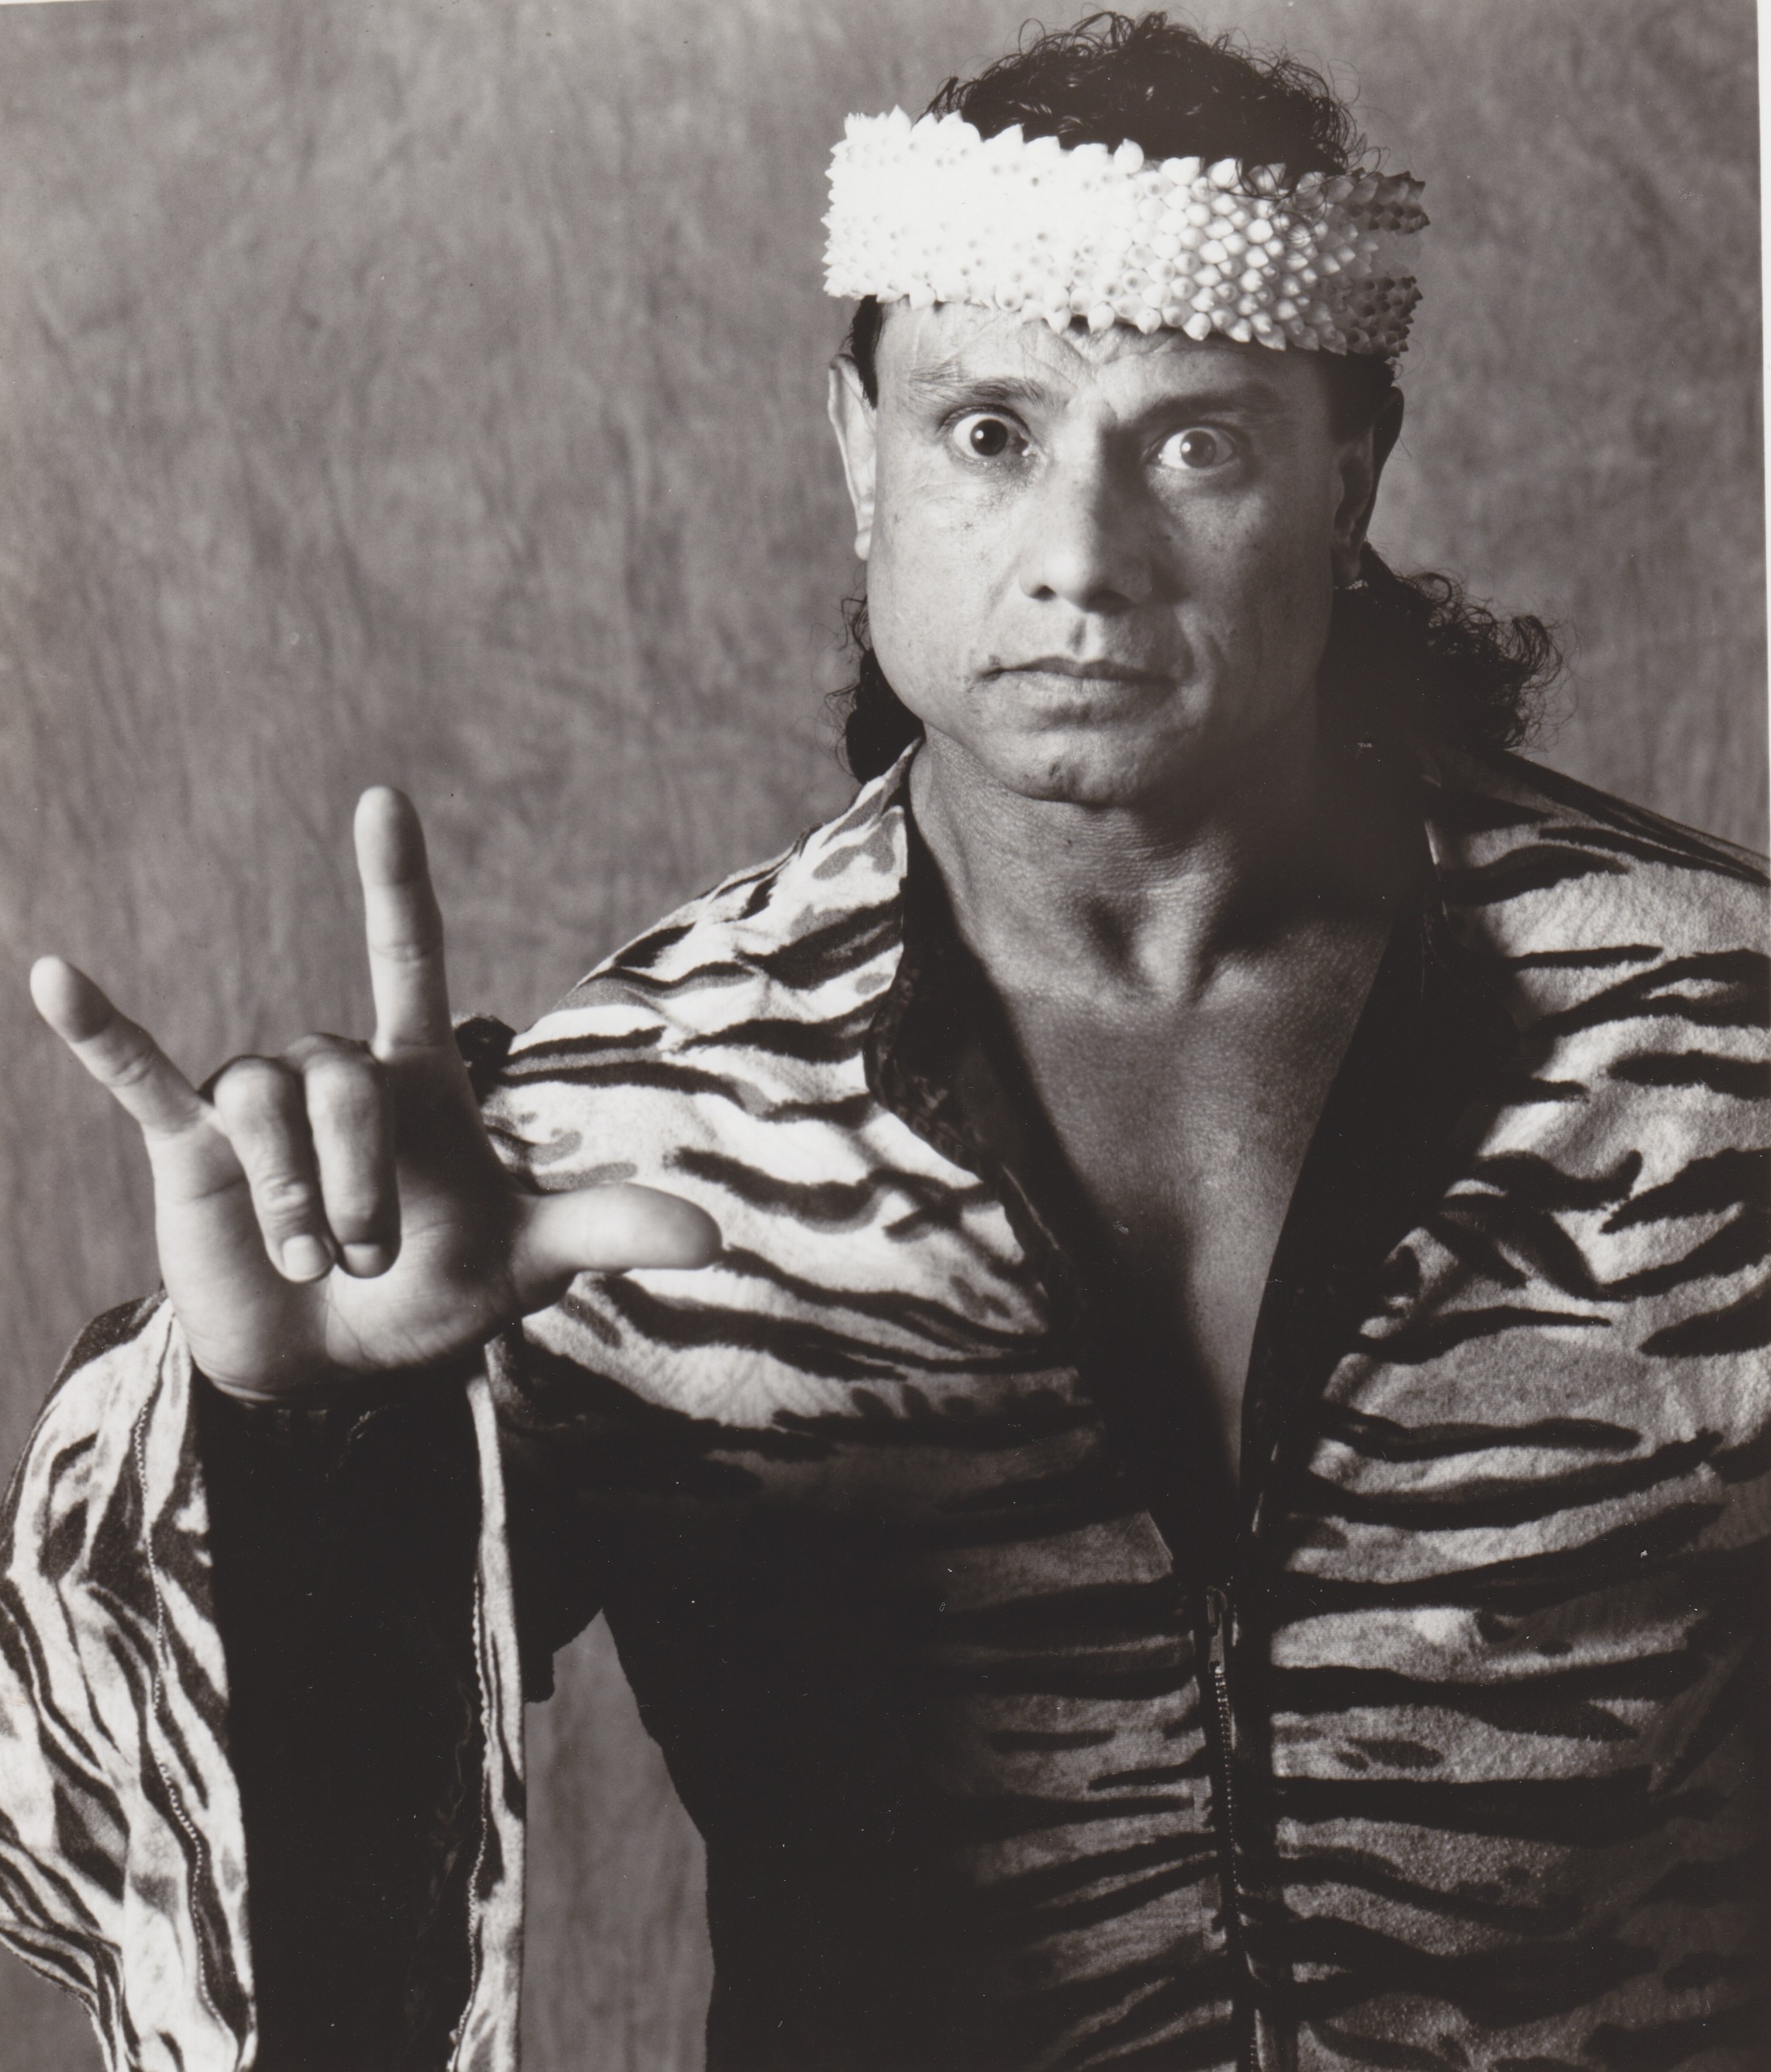 Action Jimmy Superfly Snuka Giving Poss